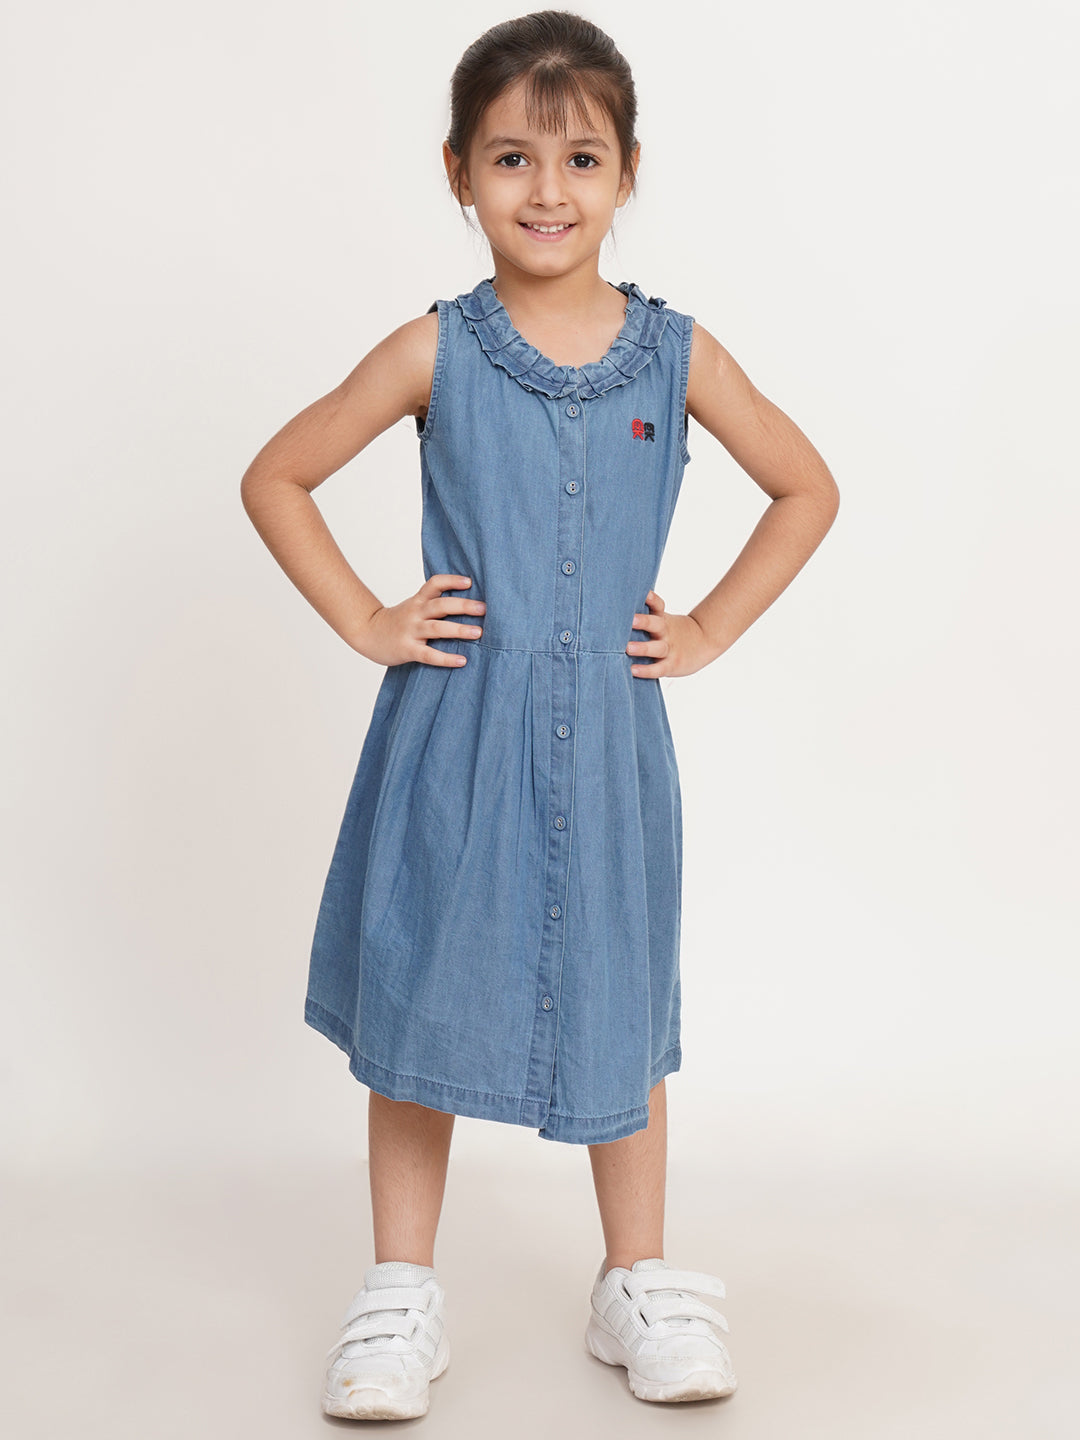 CREATIVE KID'S Girl Blue Button Front Embroidered Logo A-Line Denim Dress